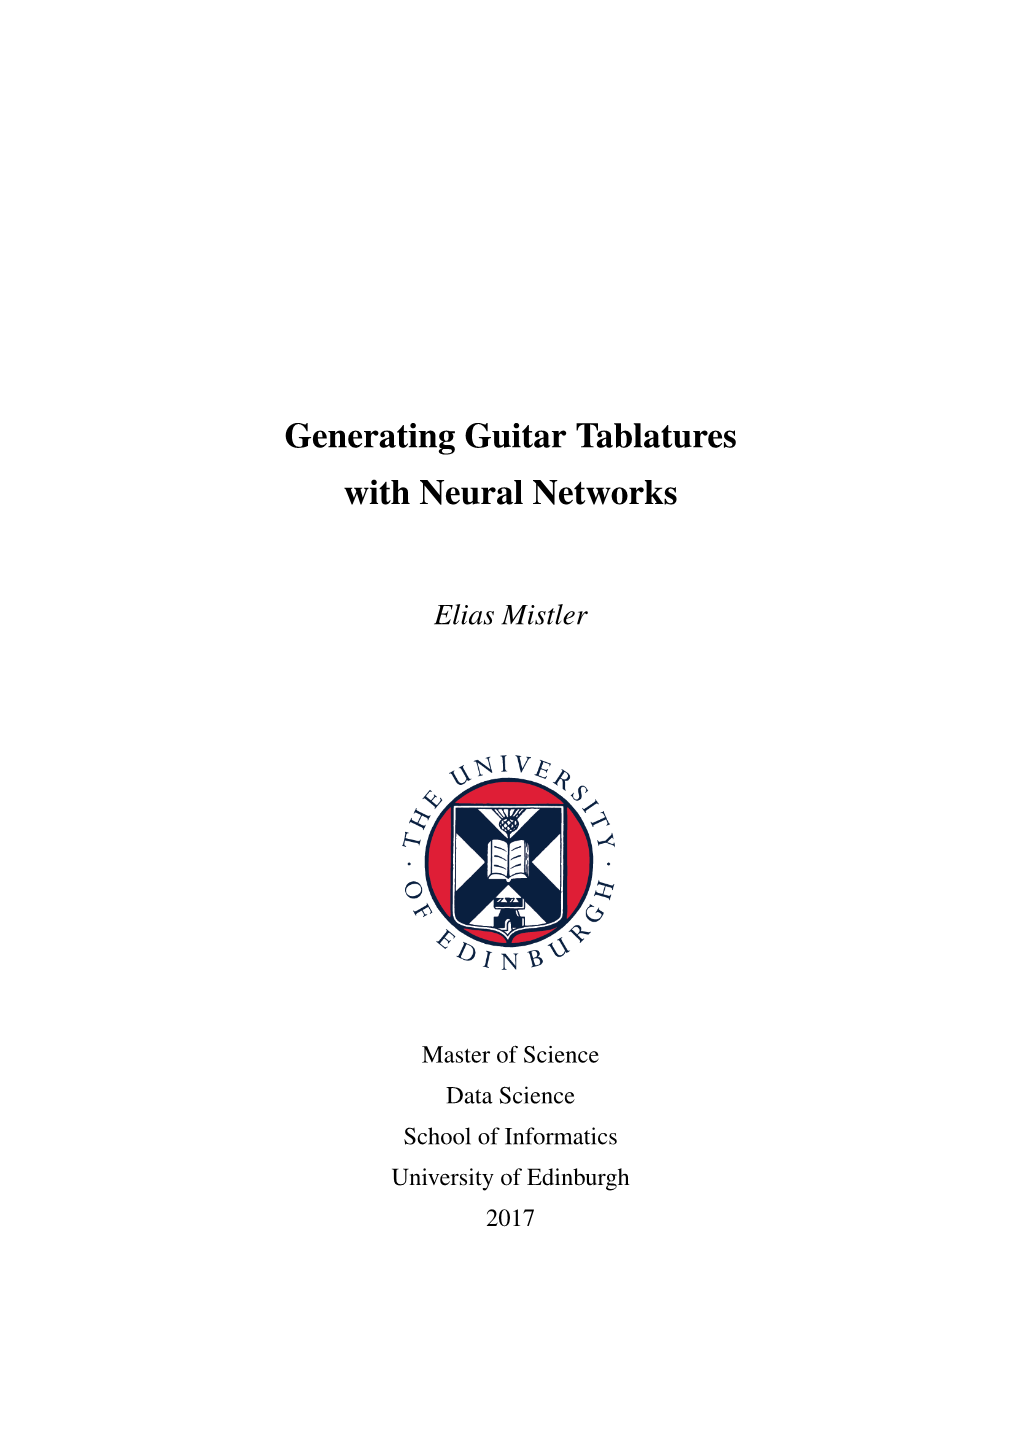 Generating Guitar Tablatures with Neural Networks